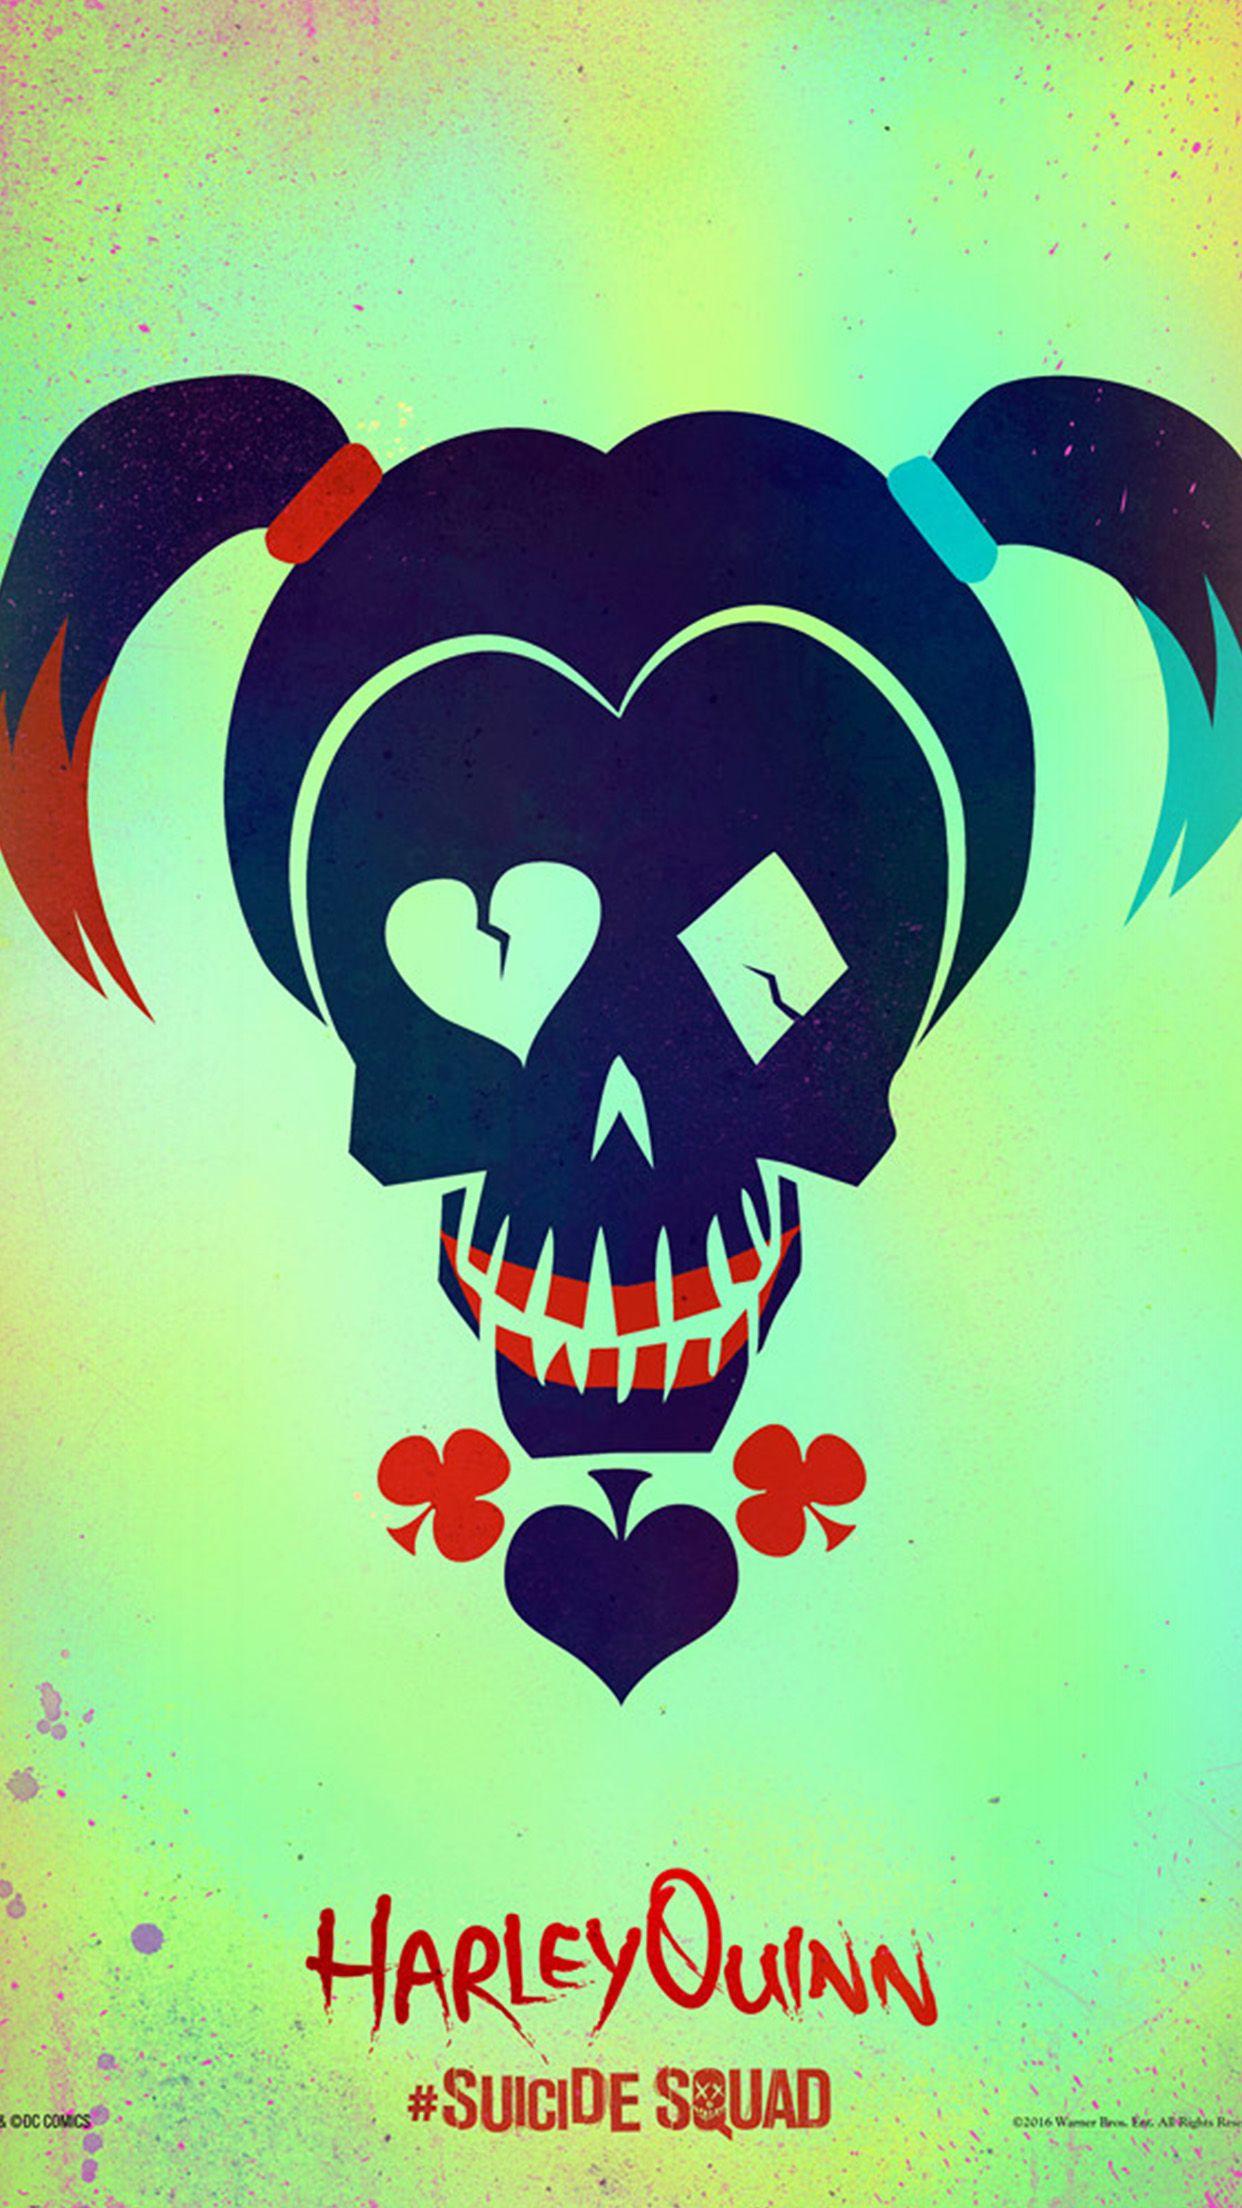 iPhone6papers.co. iPhone 6 wallpaper. harley quinn suicide